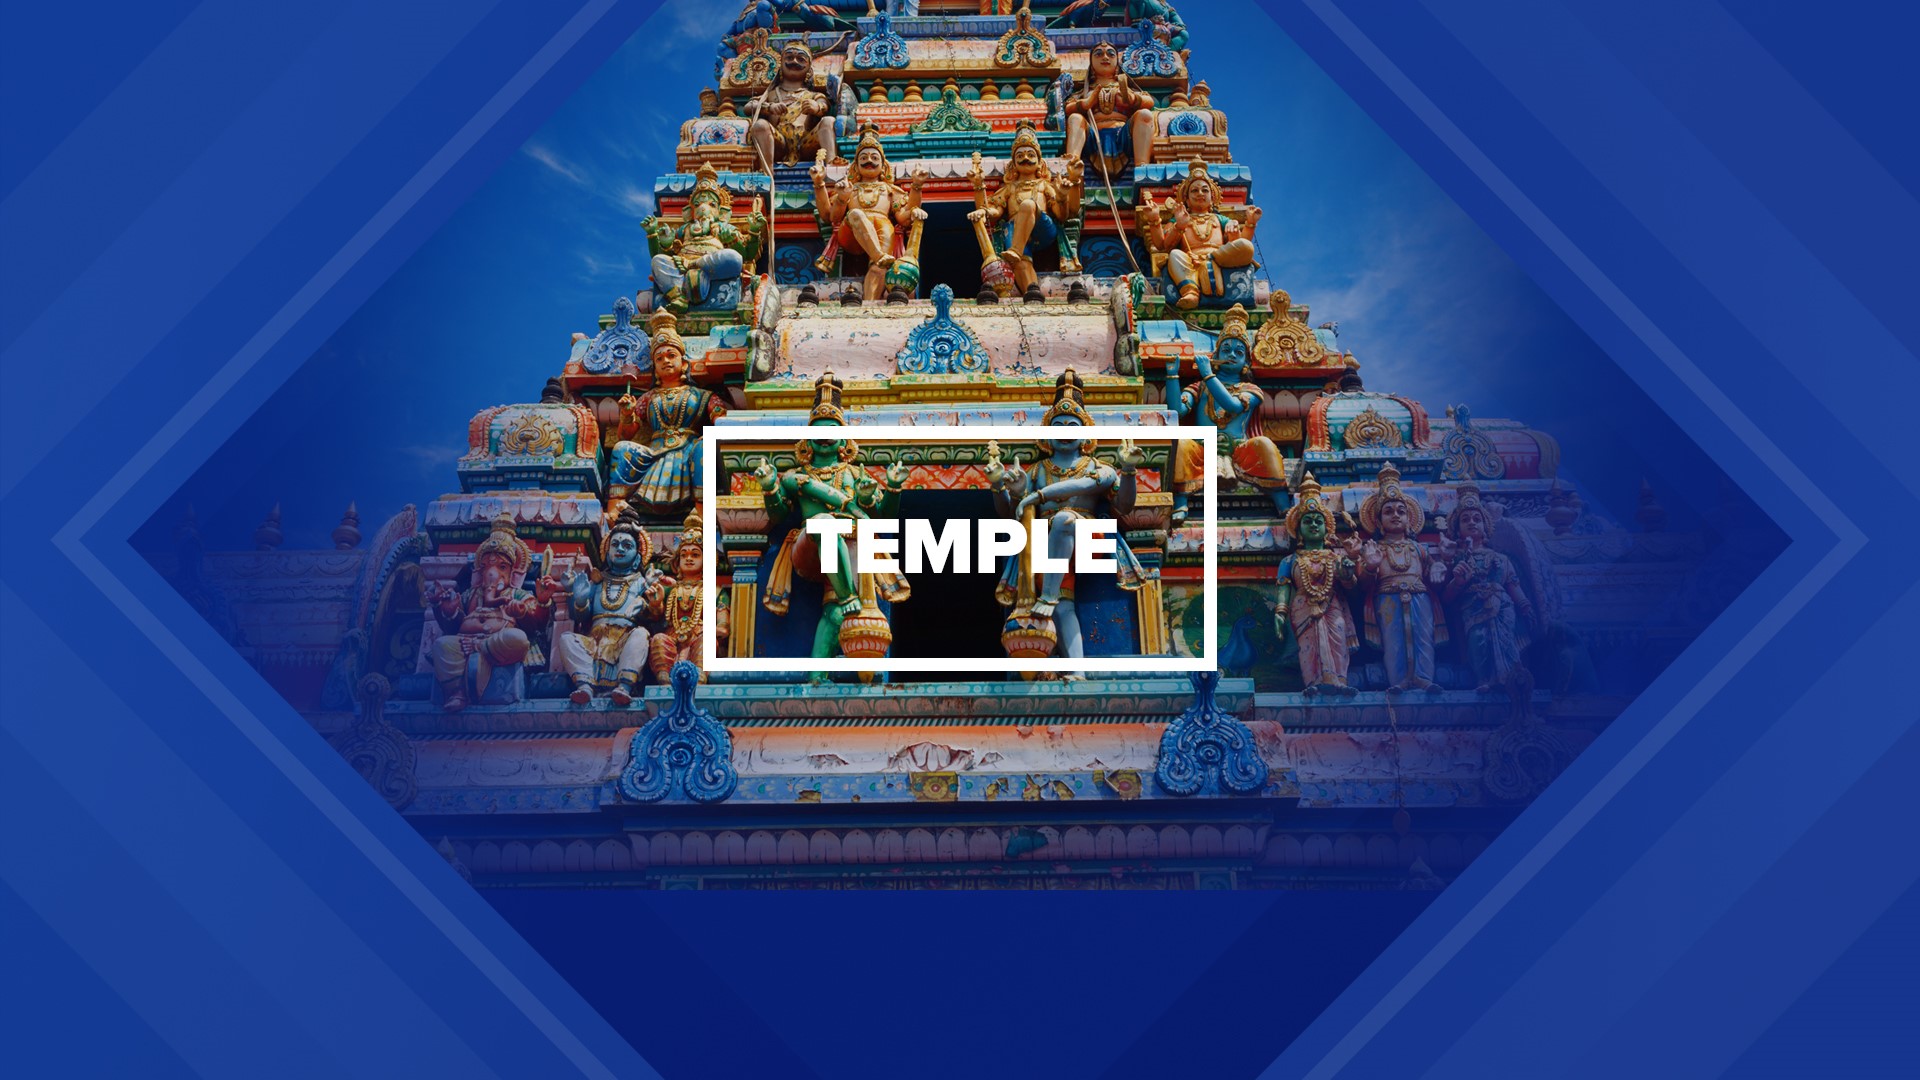 Construction will soon start on a Hindu temple and organizers are hoping to raise funds.